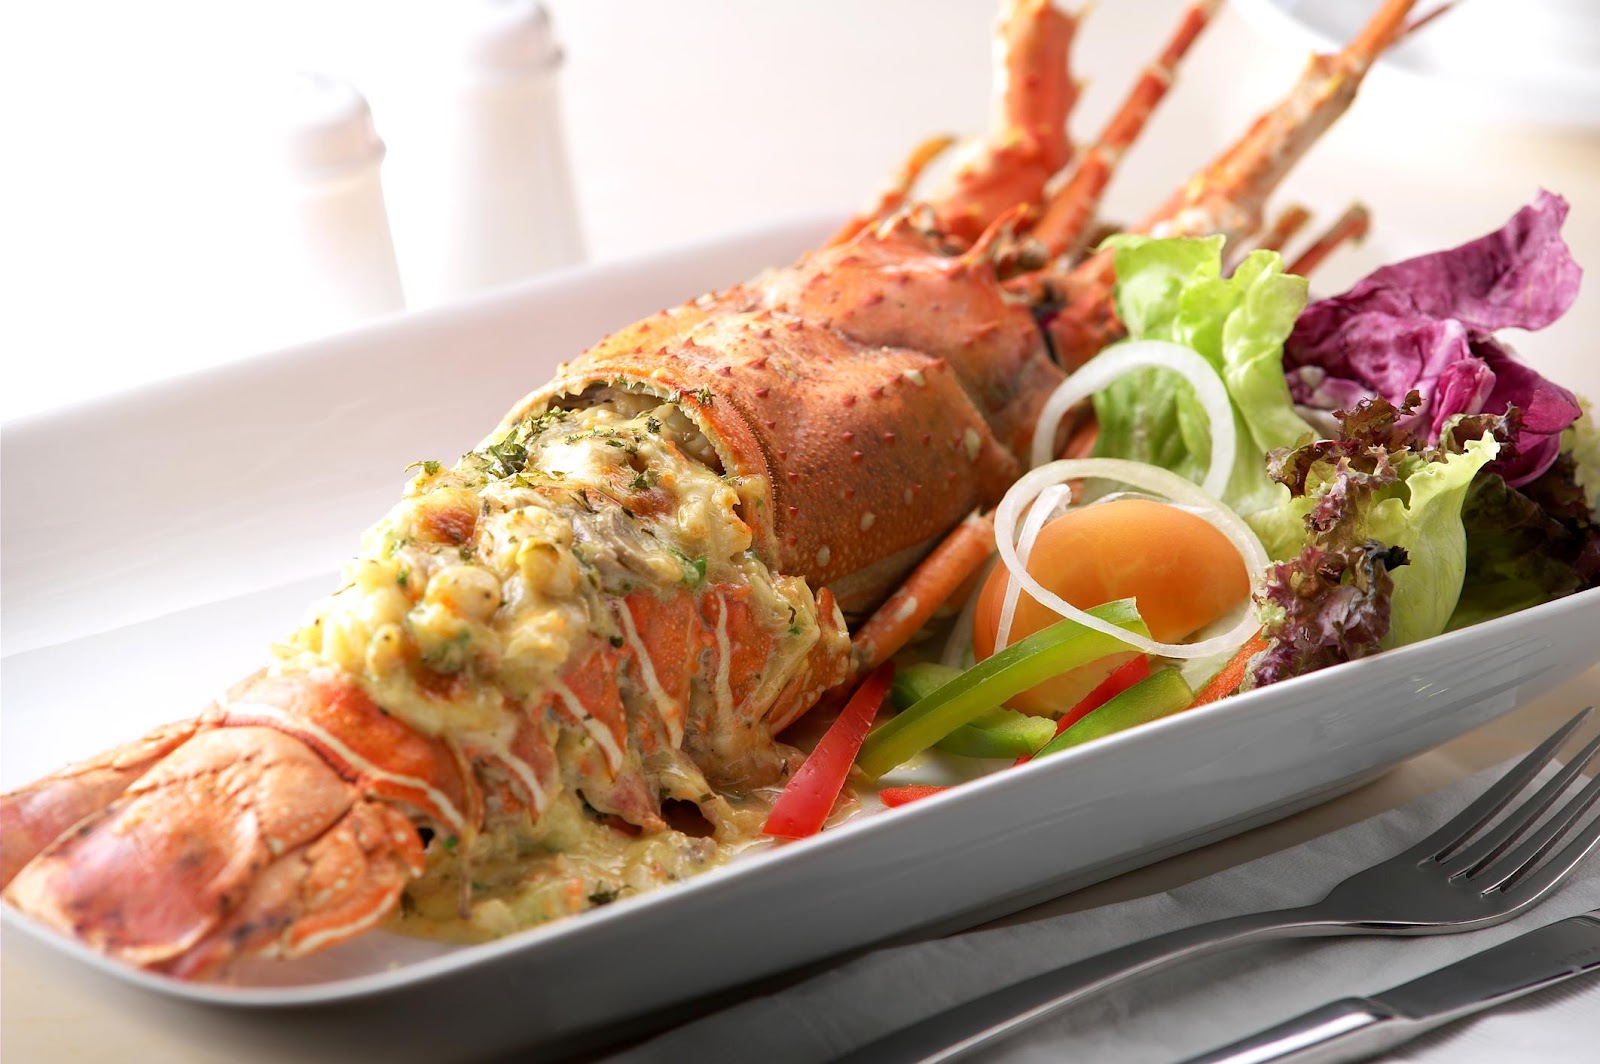 A lobster with vegetables on a plate

Description automatically generated